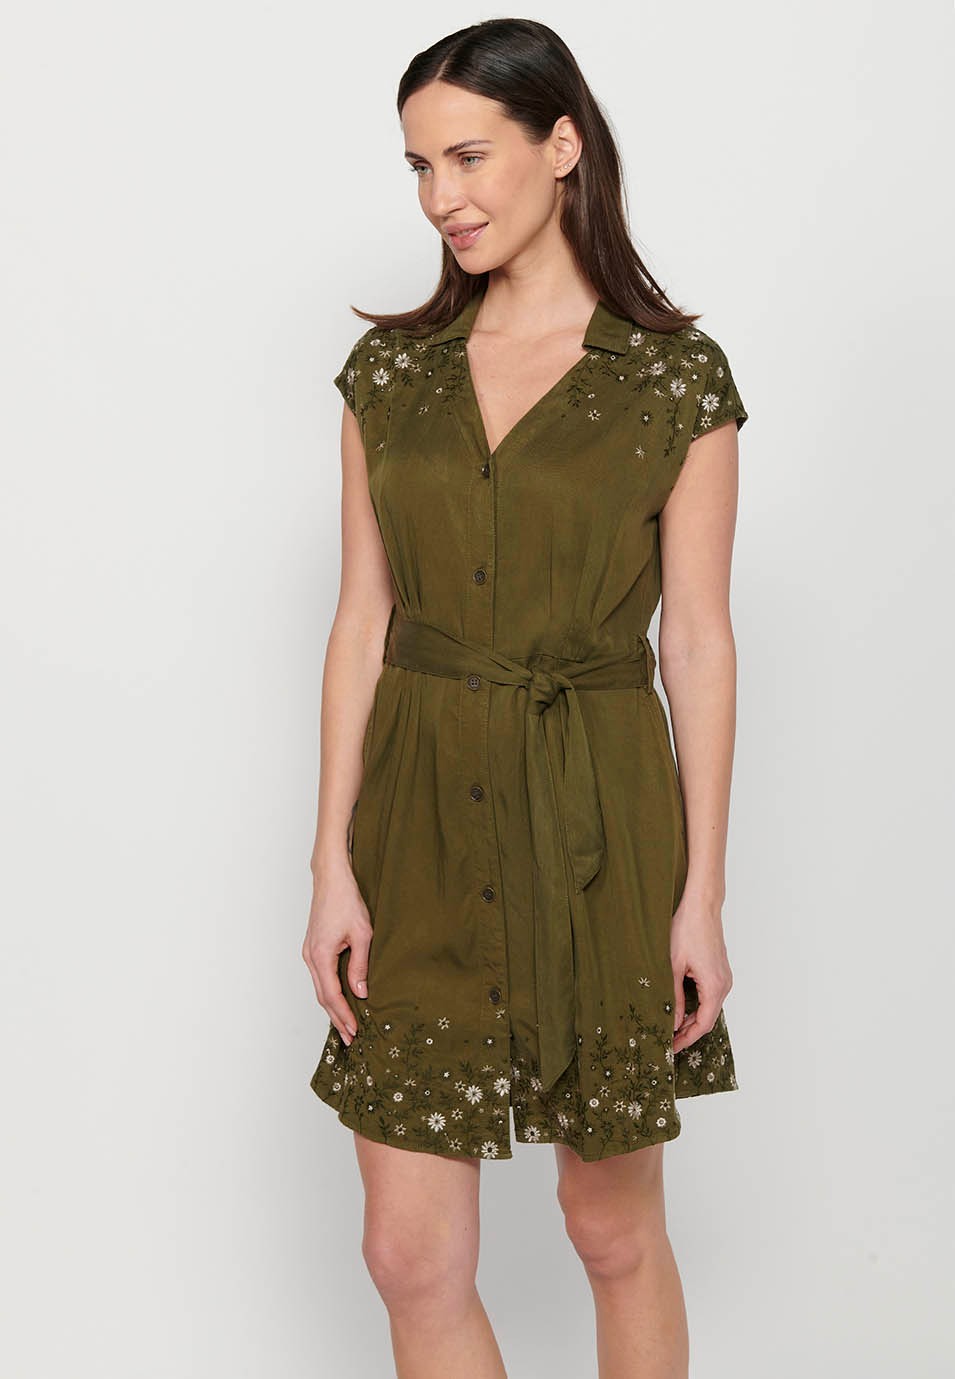 Short-sleeved midi dress with V-neckline and front button closure, fitted at the waist with embroidered details in Khaki color for Women 8